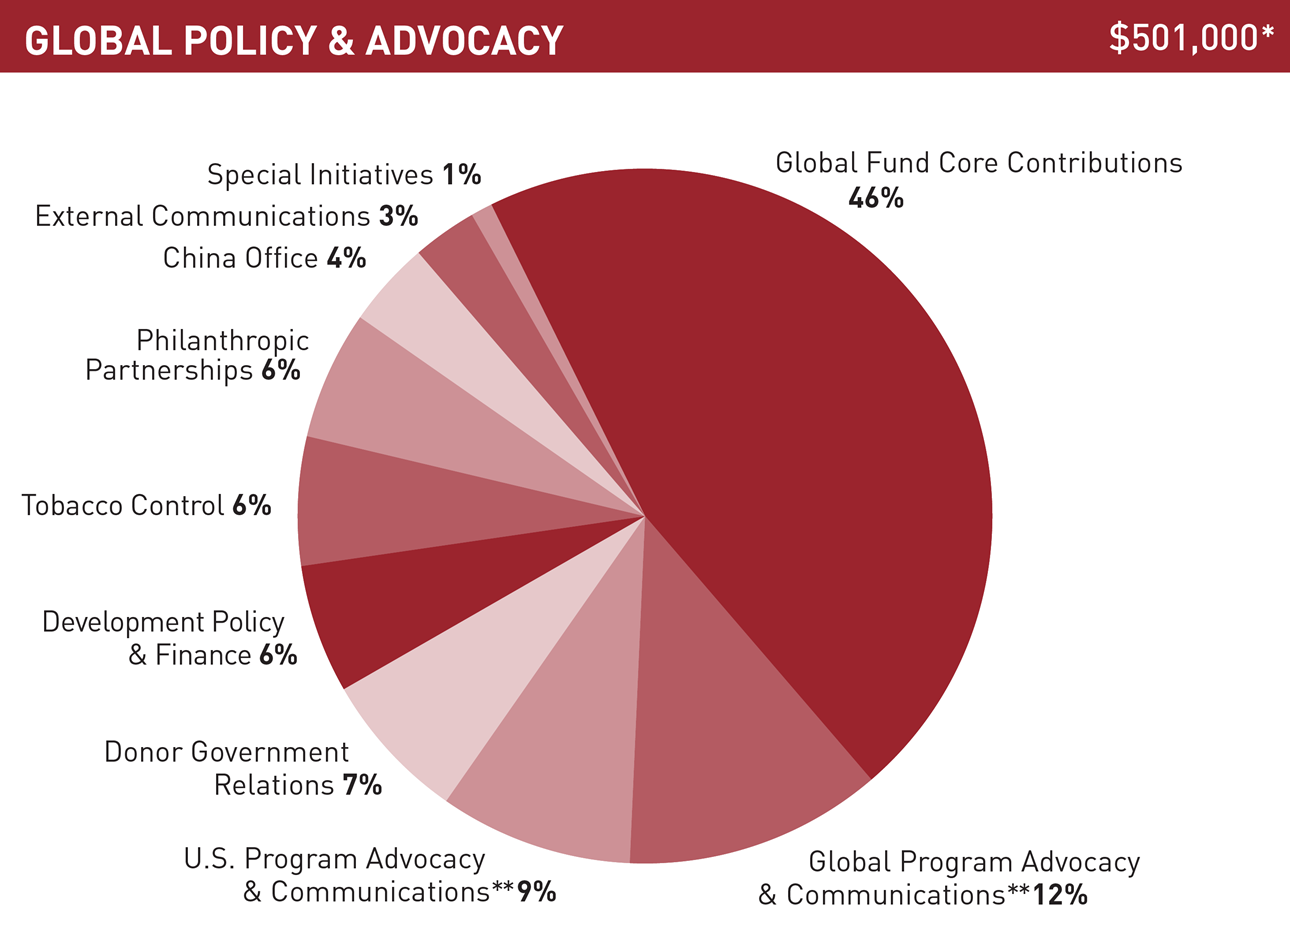 Gates Foundation Annual Report 2018 Global Policy and Advocacy